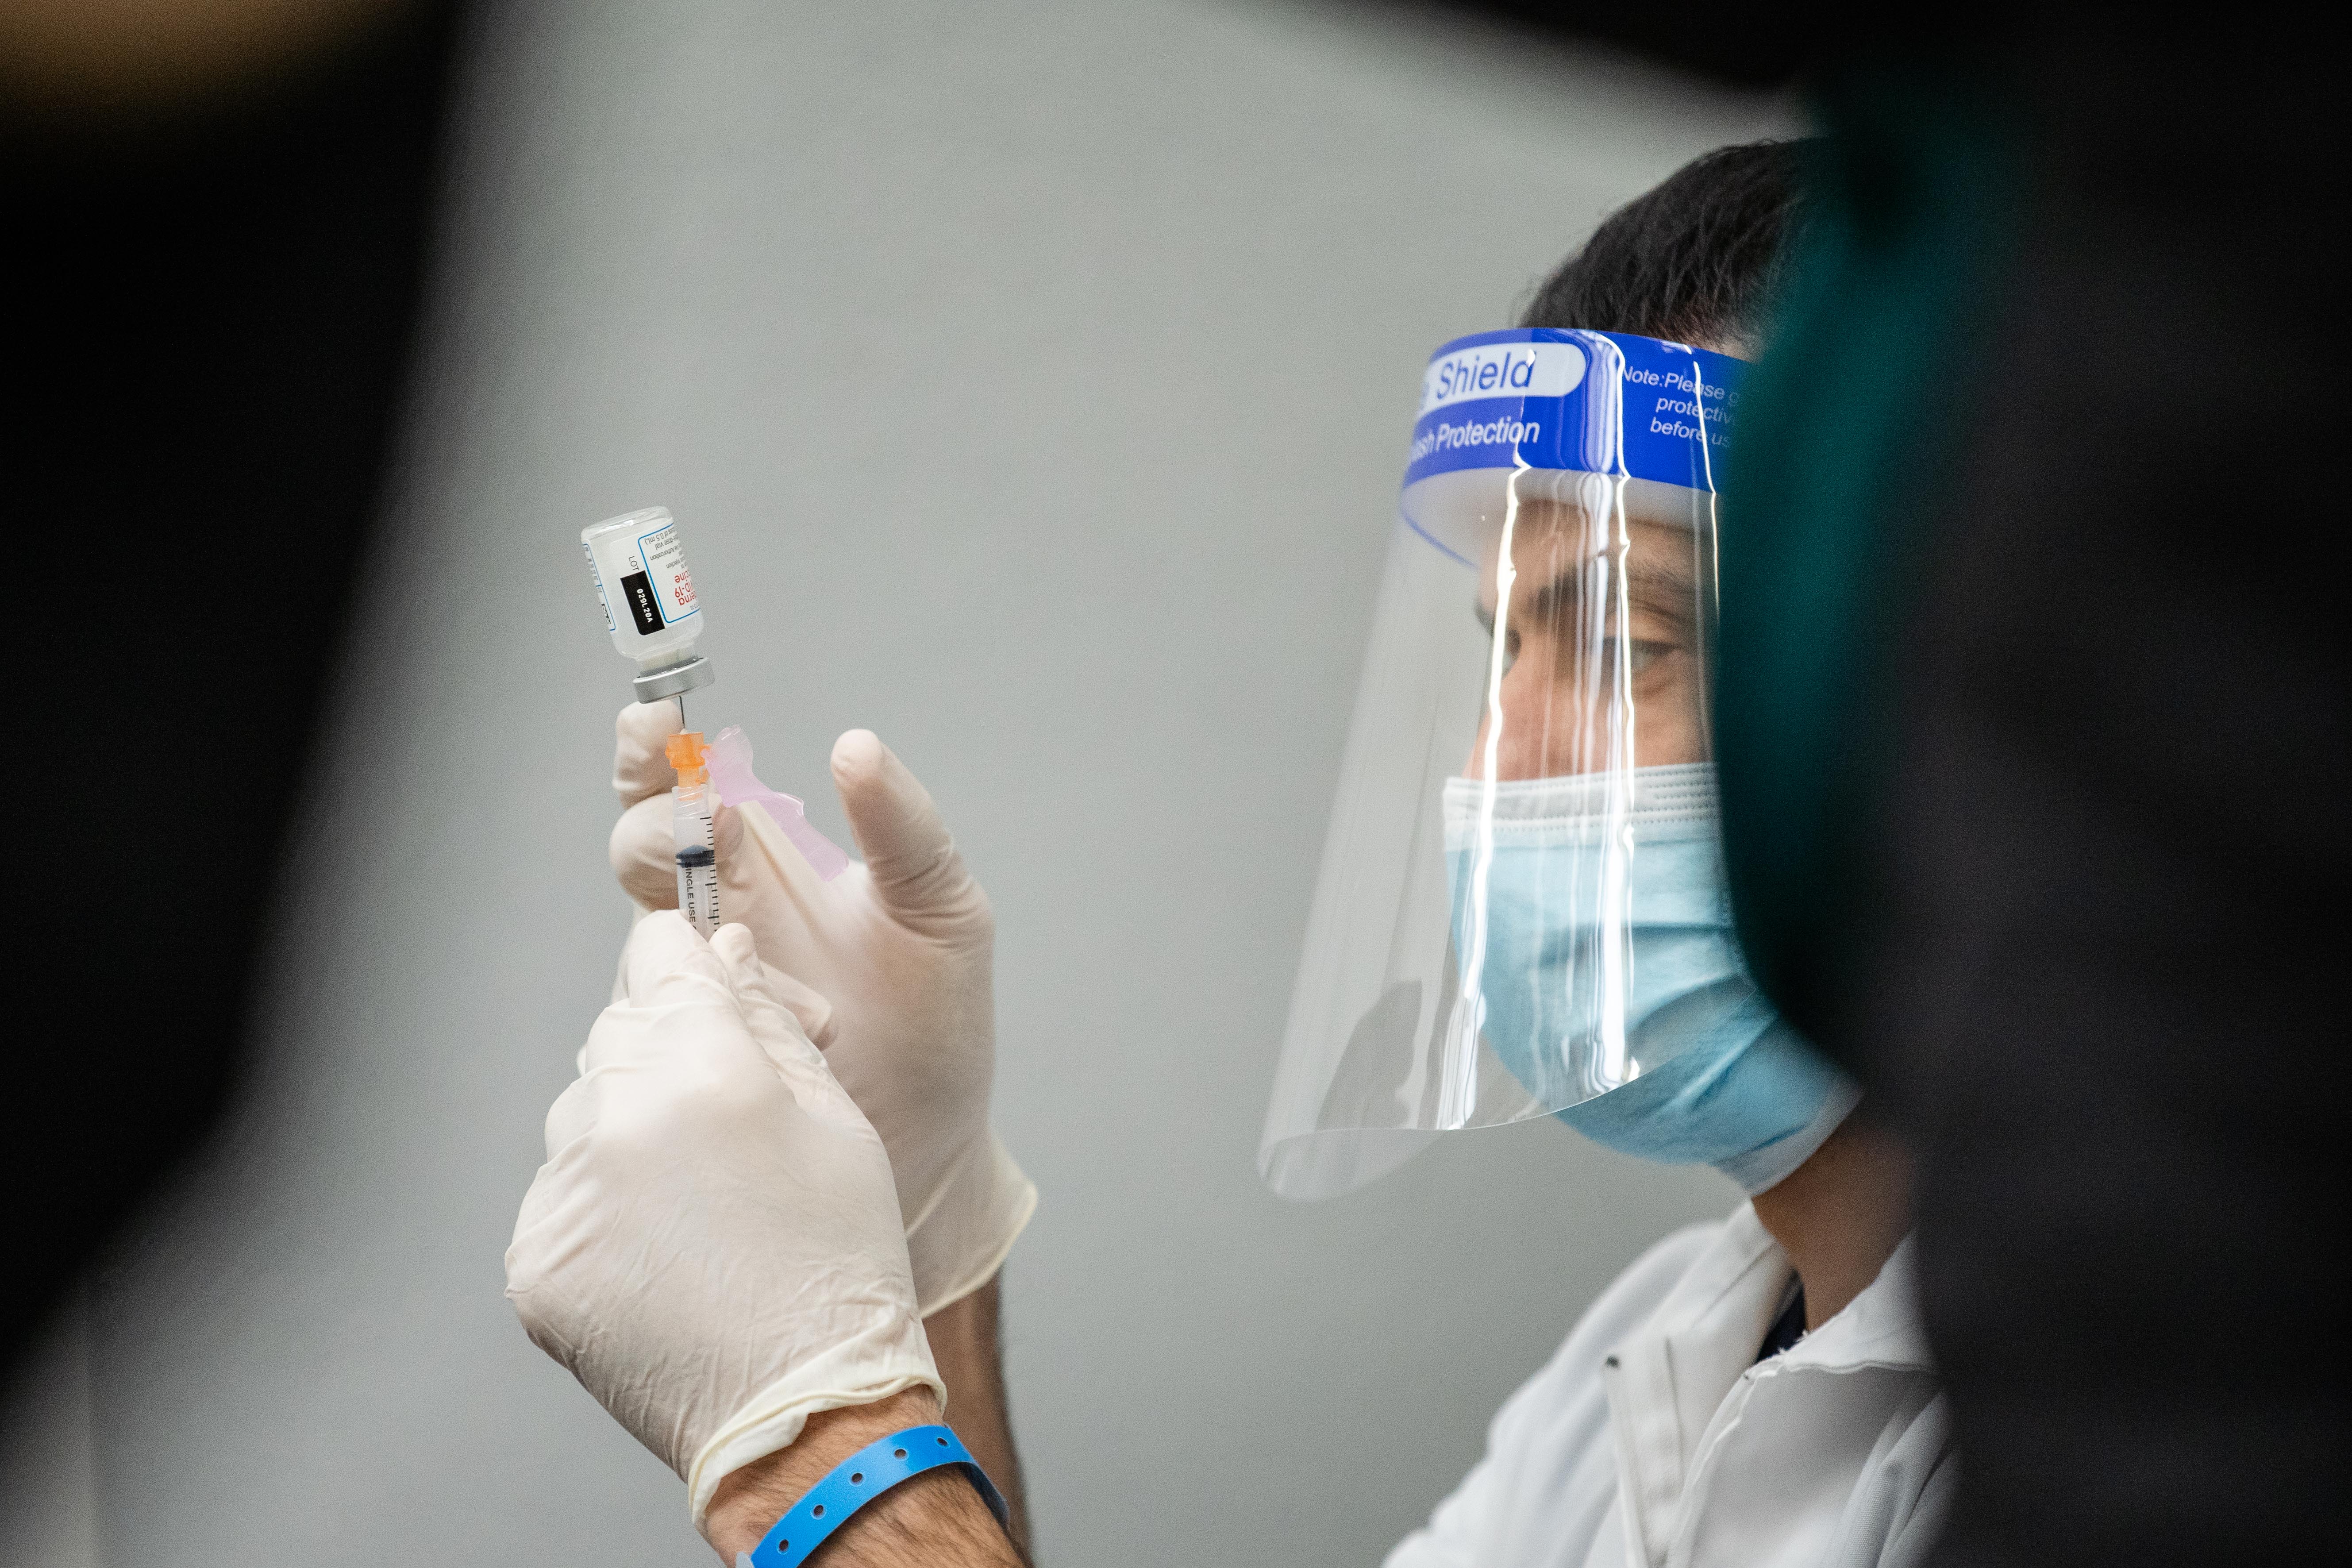 A health care worker prepares a COVID-19 vaccine dose in February on the West Side. Cases are higher in Illinois now than they were 10 months ago.